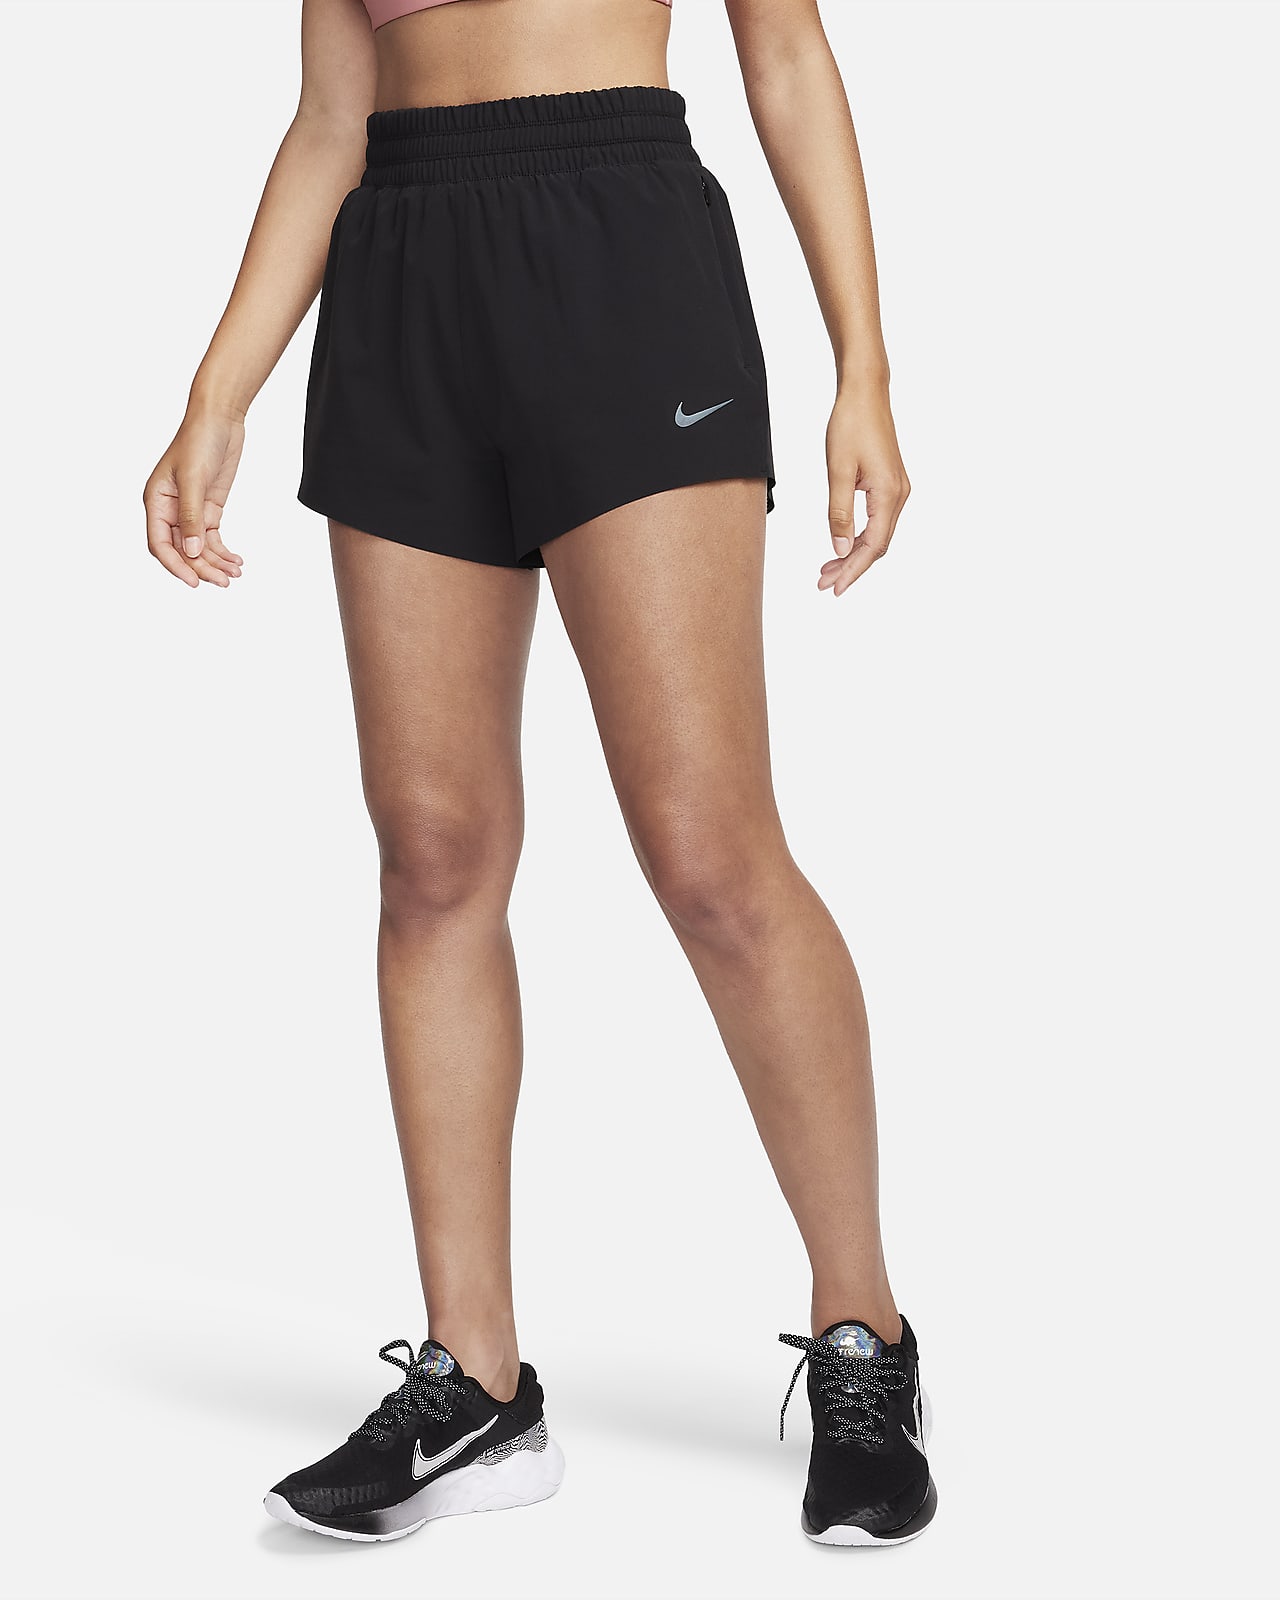 https://static.nike.com/a/images/t_PDP_1280_v1/f_auto,q_auto:eco/2715b2b6-a08e-40e4-b723-d8c8c084de15/dri-fit-running-division-womens-high-waisted-3-brief-lined-running-shorts-with-pockets-fLsW1M.png